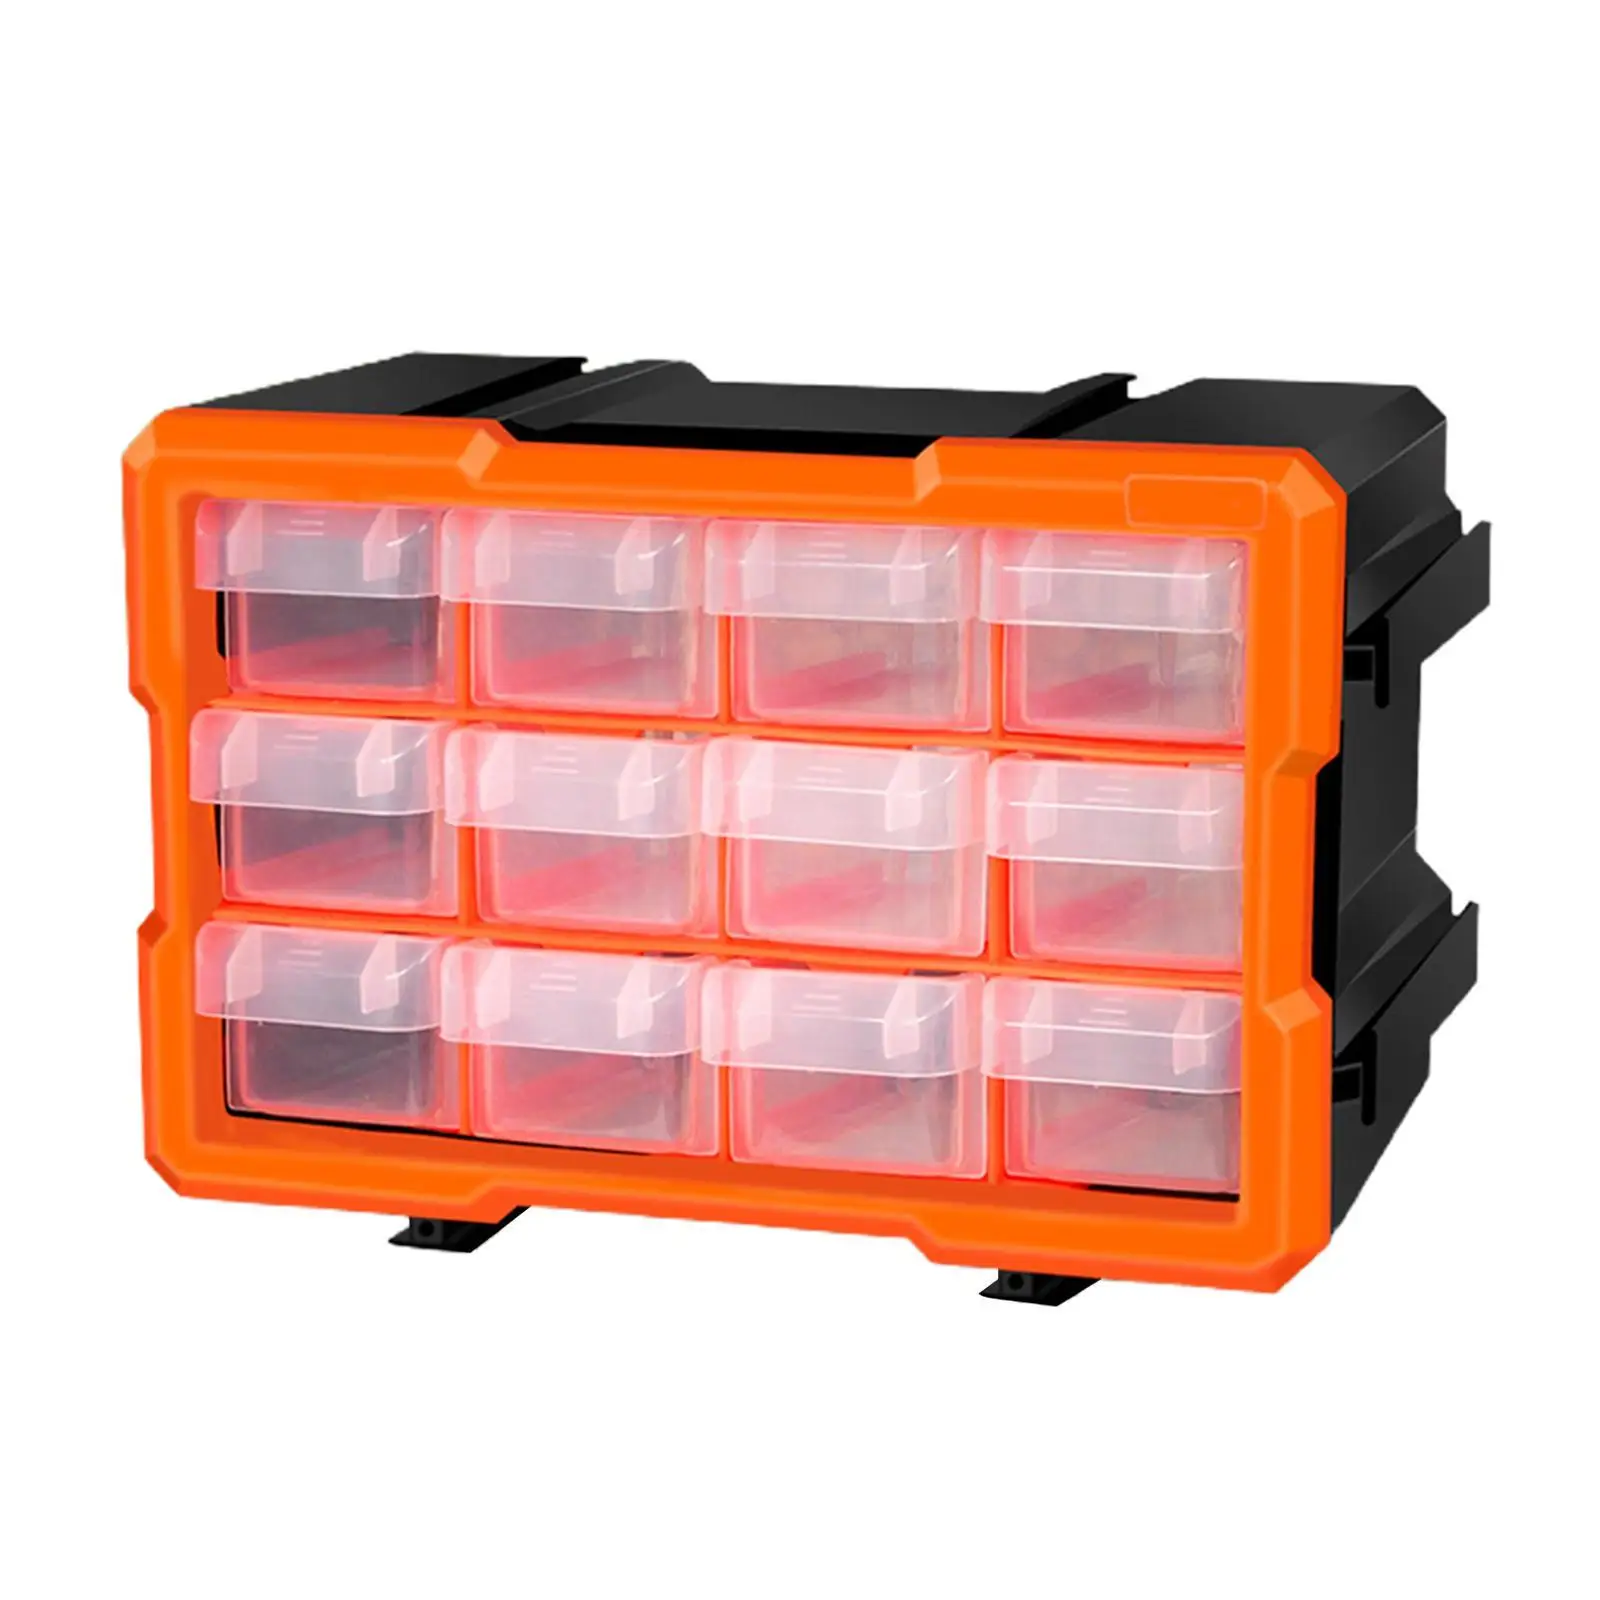  Storage Box Durable  with Compartments Excellent for Screws Nuts and Bolts